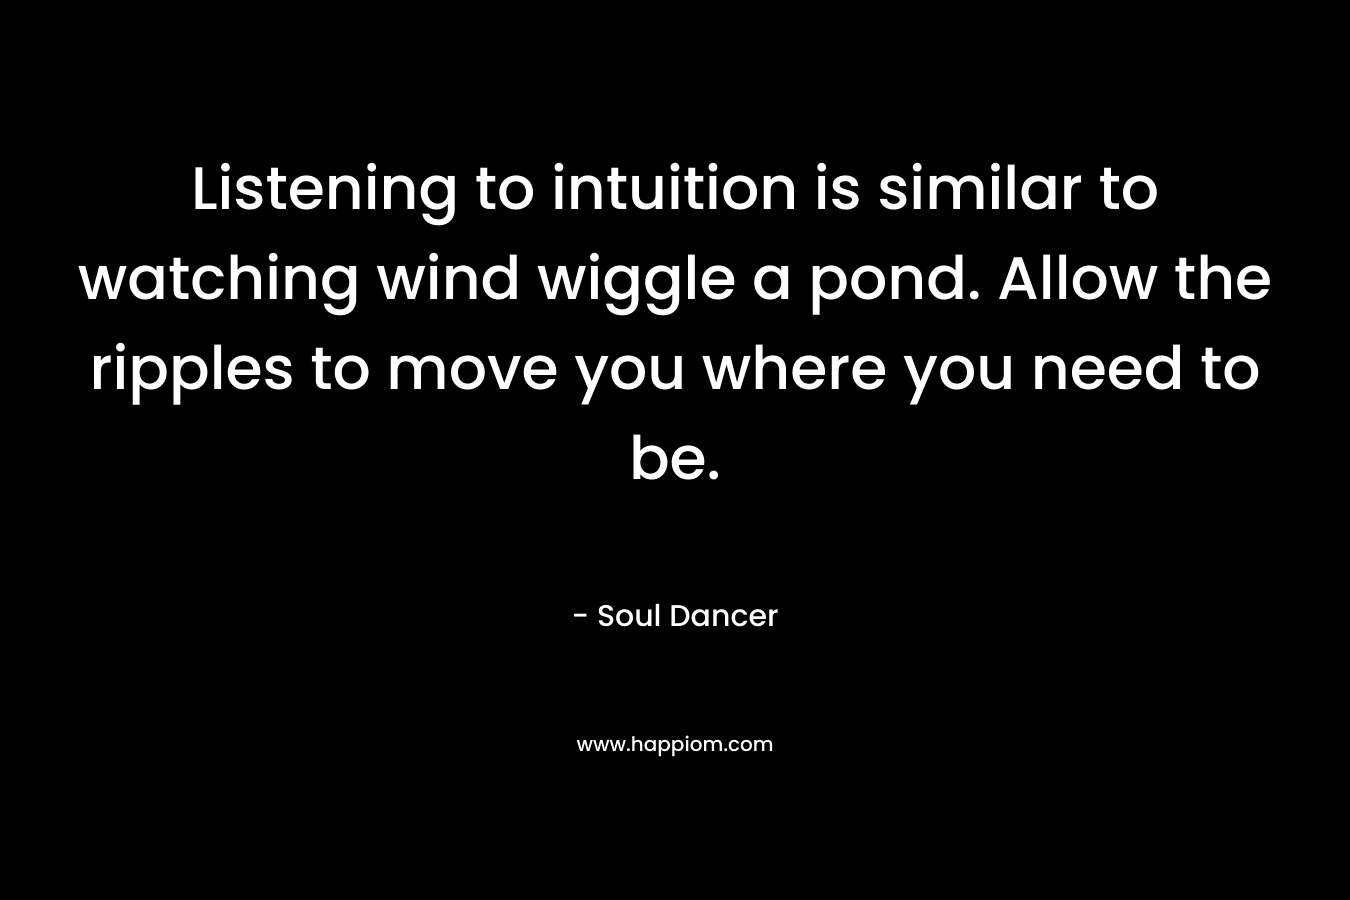 Listening to intuition is similar to watching wind wiggle a pond. Allow the ripples to move you where you need to be.